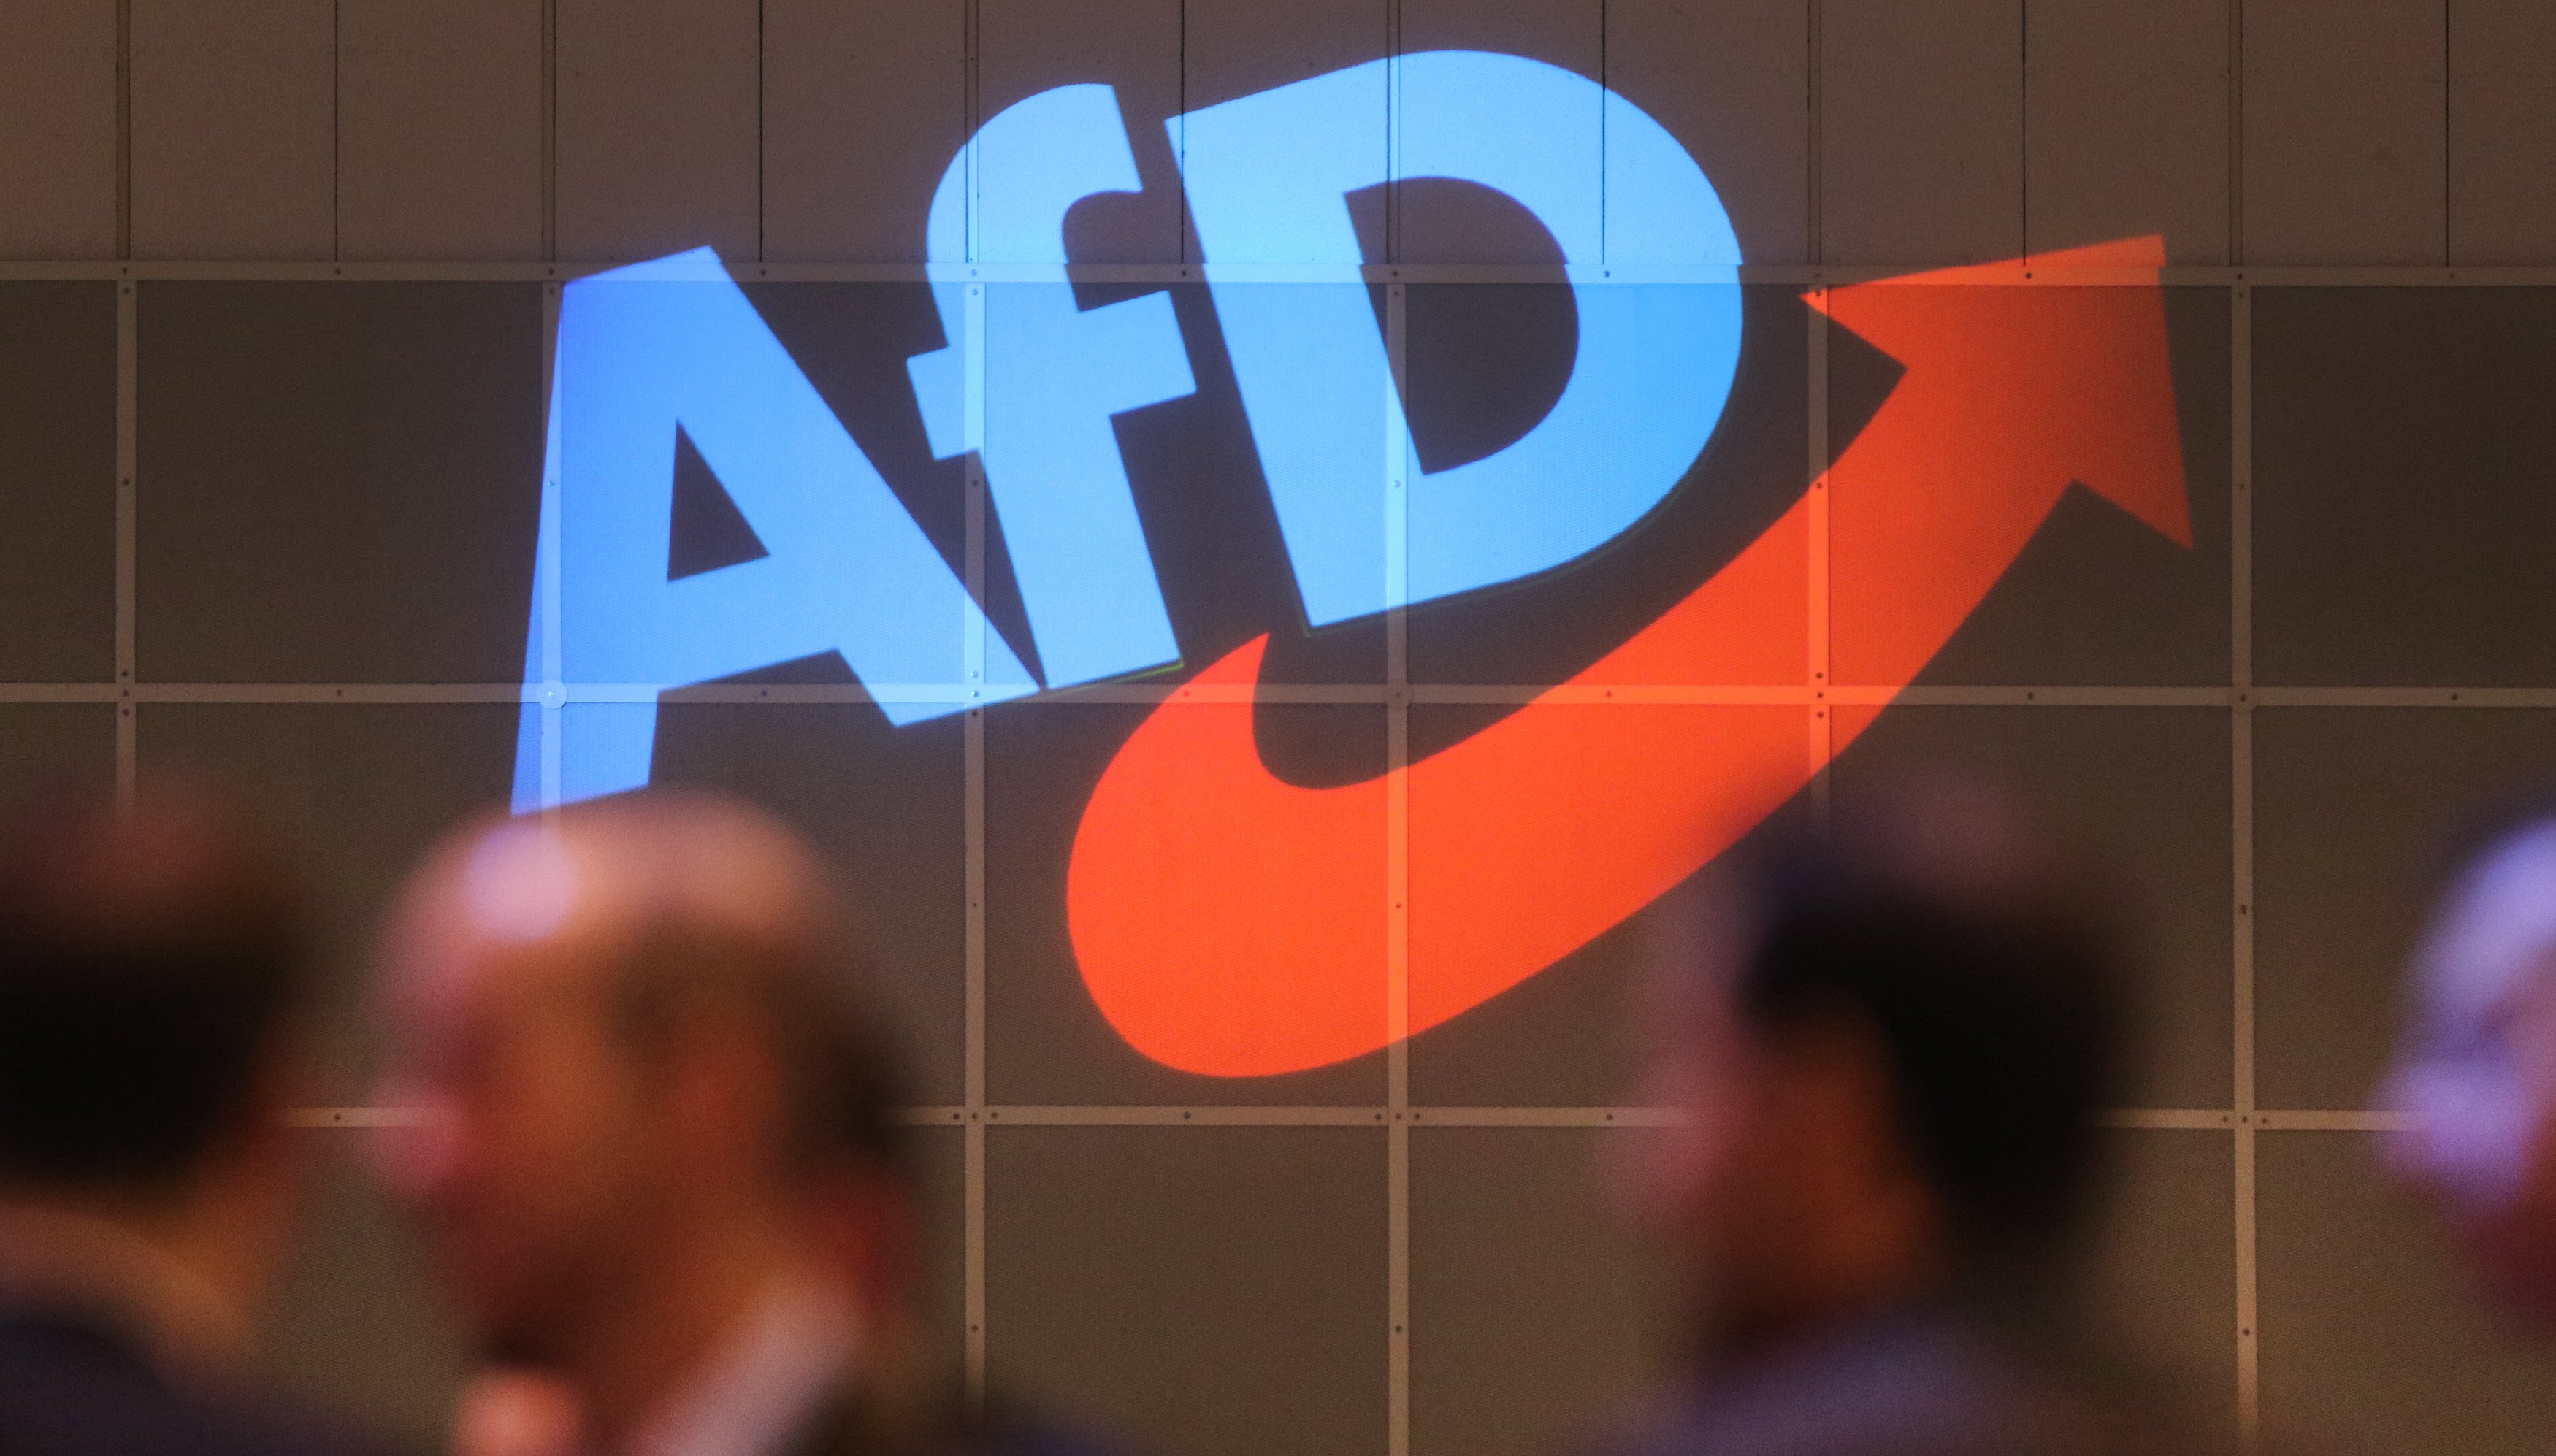 An AfD logo during the German right-wing populist 'Alternative for Germany' party convention in Hanover, Germany, December 2017.